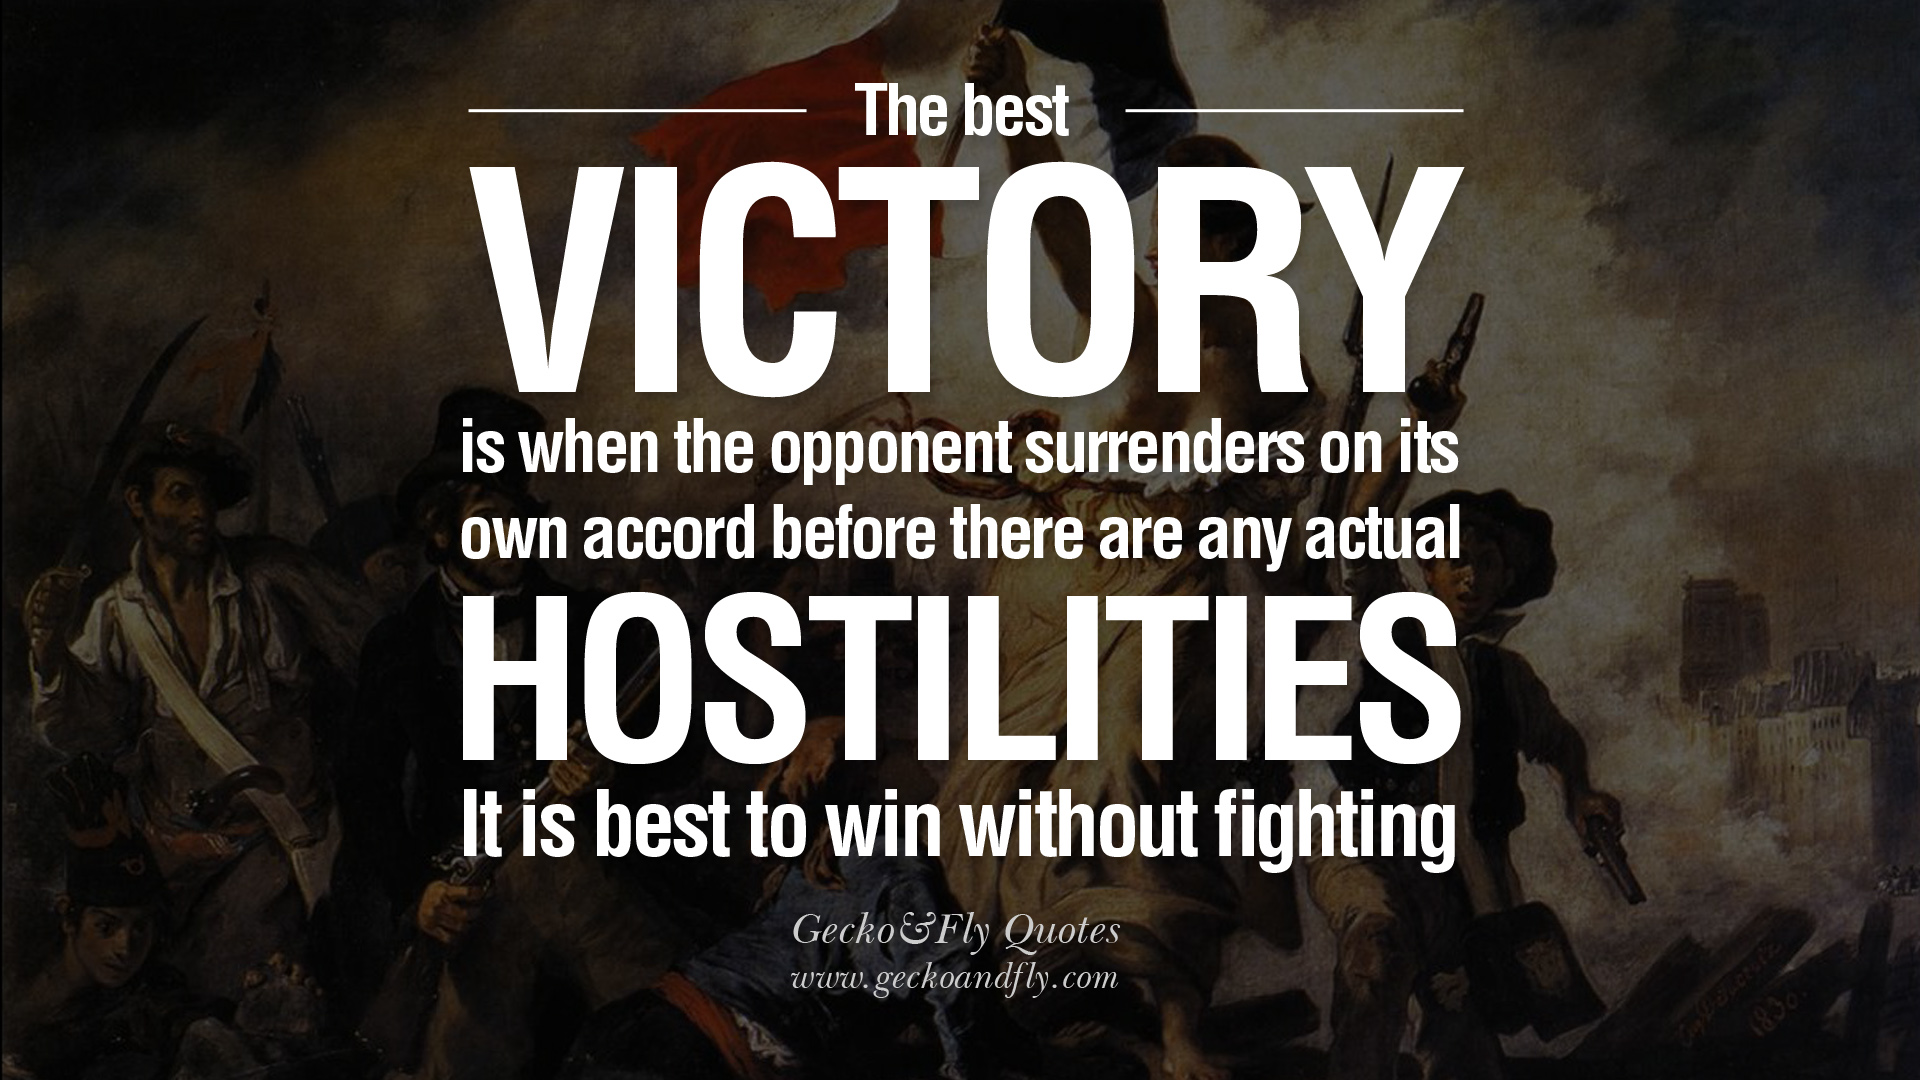 The best victory is when the opponent surrenders of its own accord before there are any actual hostilities… It is best to win without fighting.